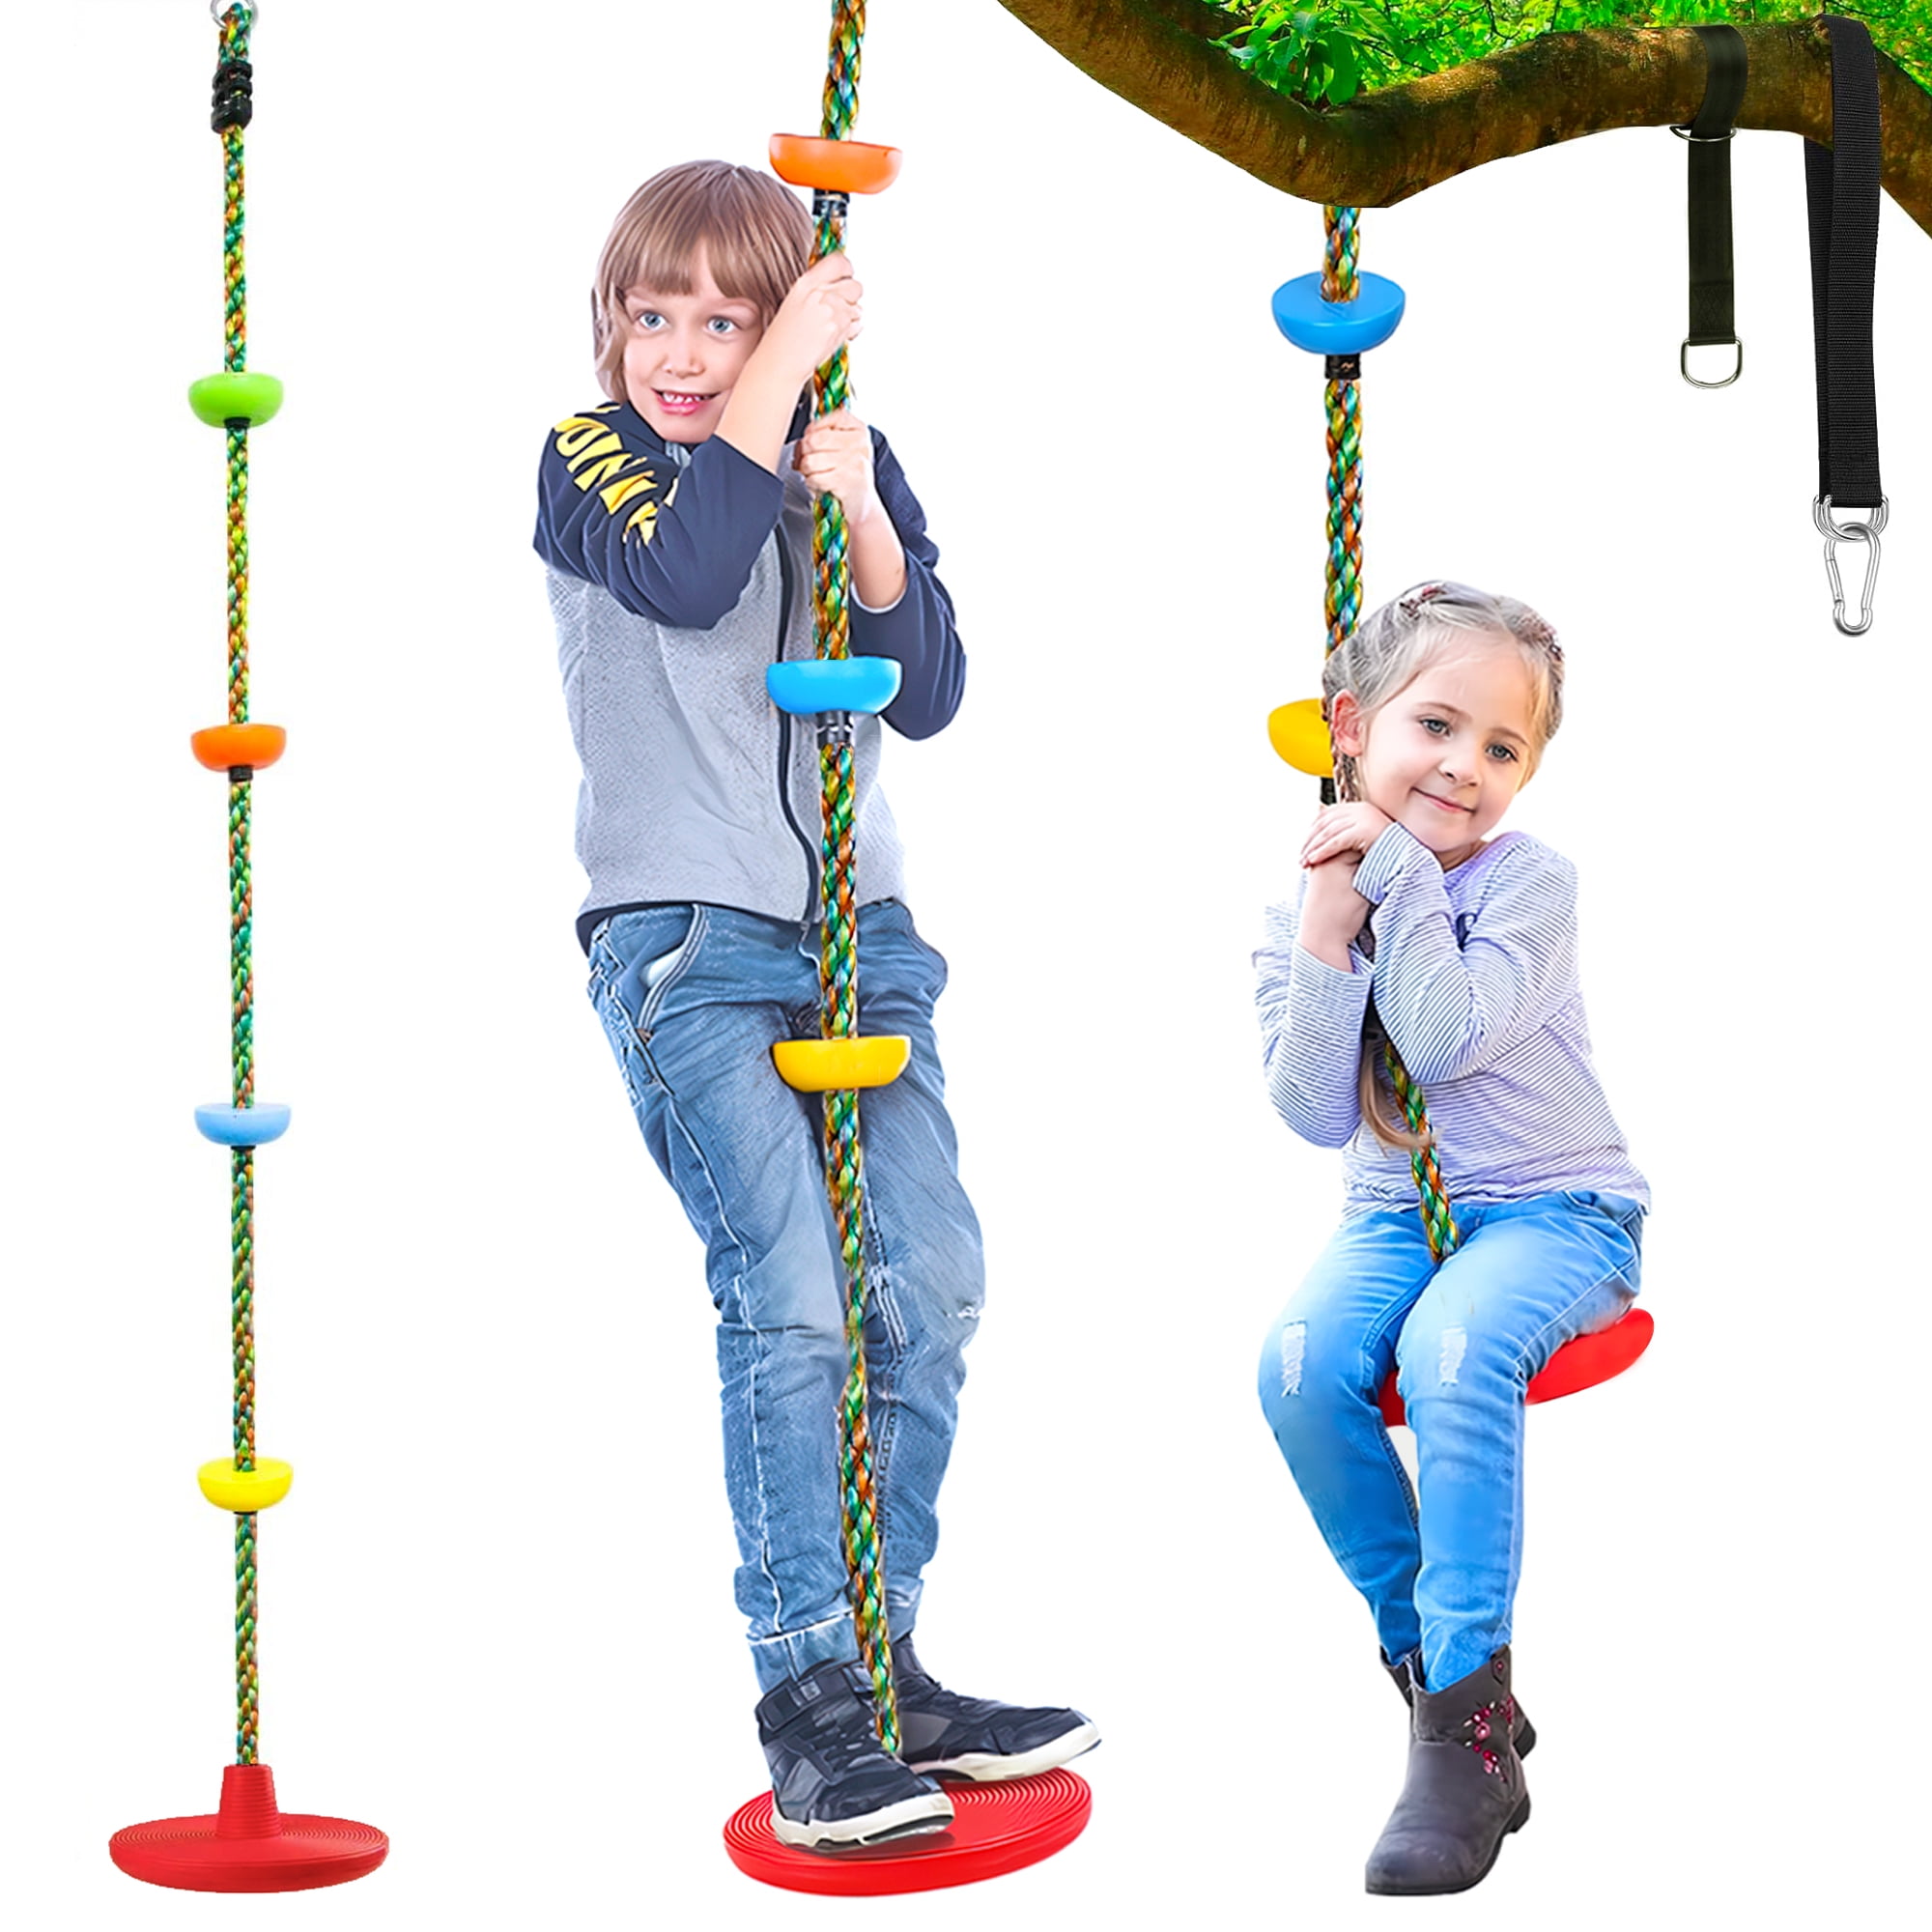 iFanze Tree Swing for Kids, 3-in-1 Climbing Rope with Platforms and Disc  Seat Swing Set, Indoor Outdoor Swing for Outside Trees Treehouse, 1 Pack,  Red